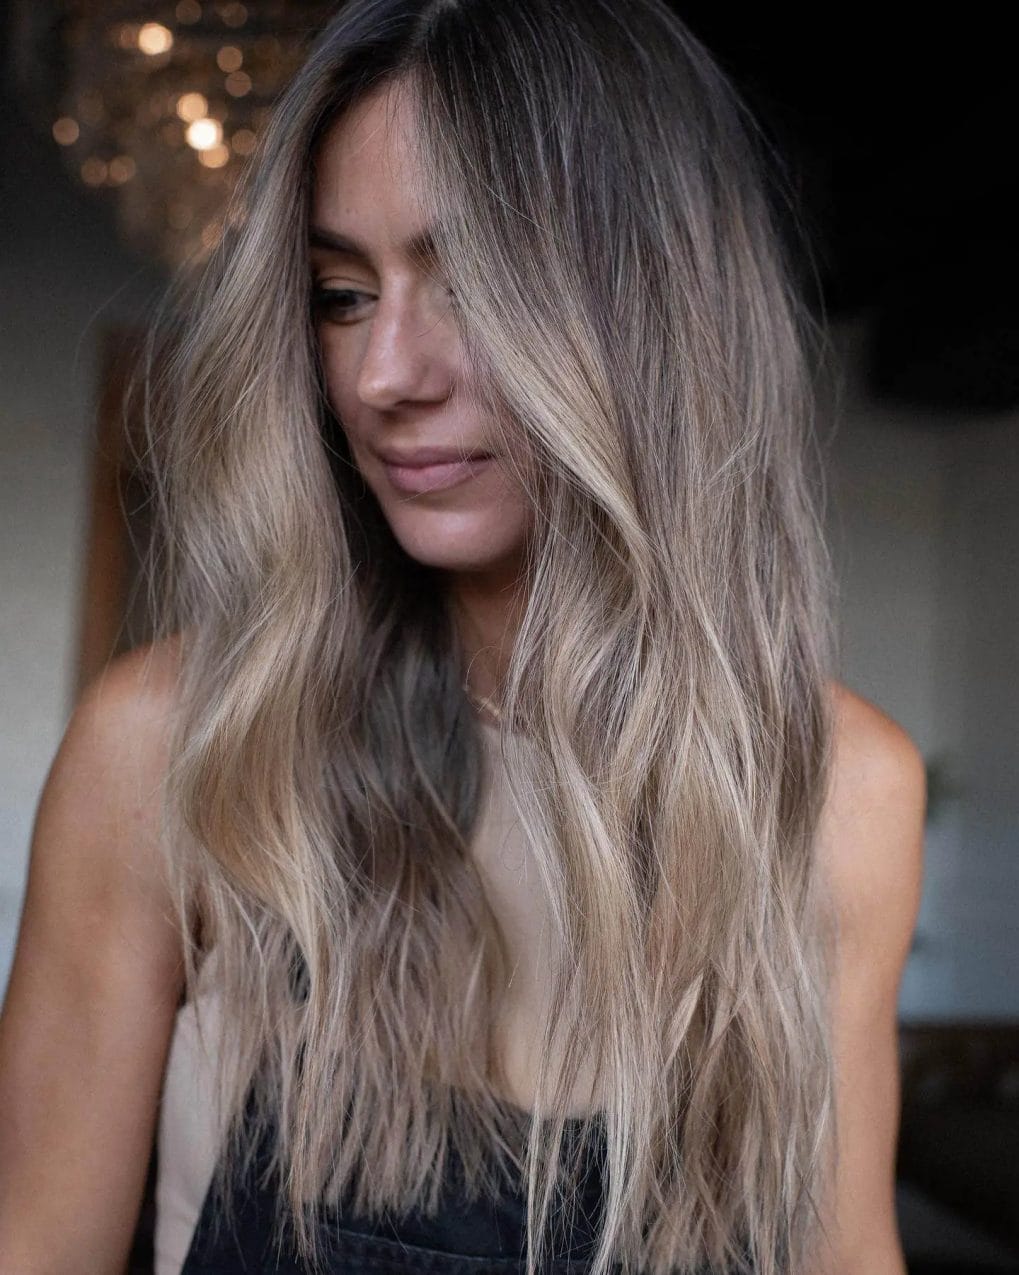 Textured, beachy layers in sun-kissed blonde and natural gray.